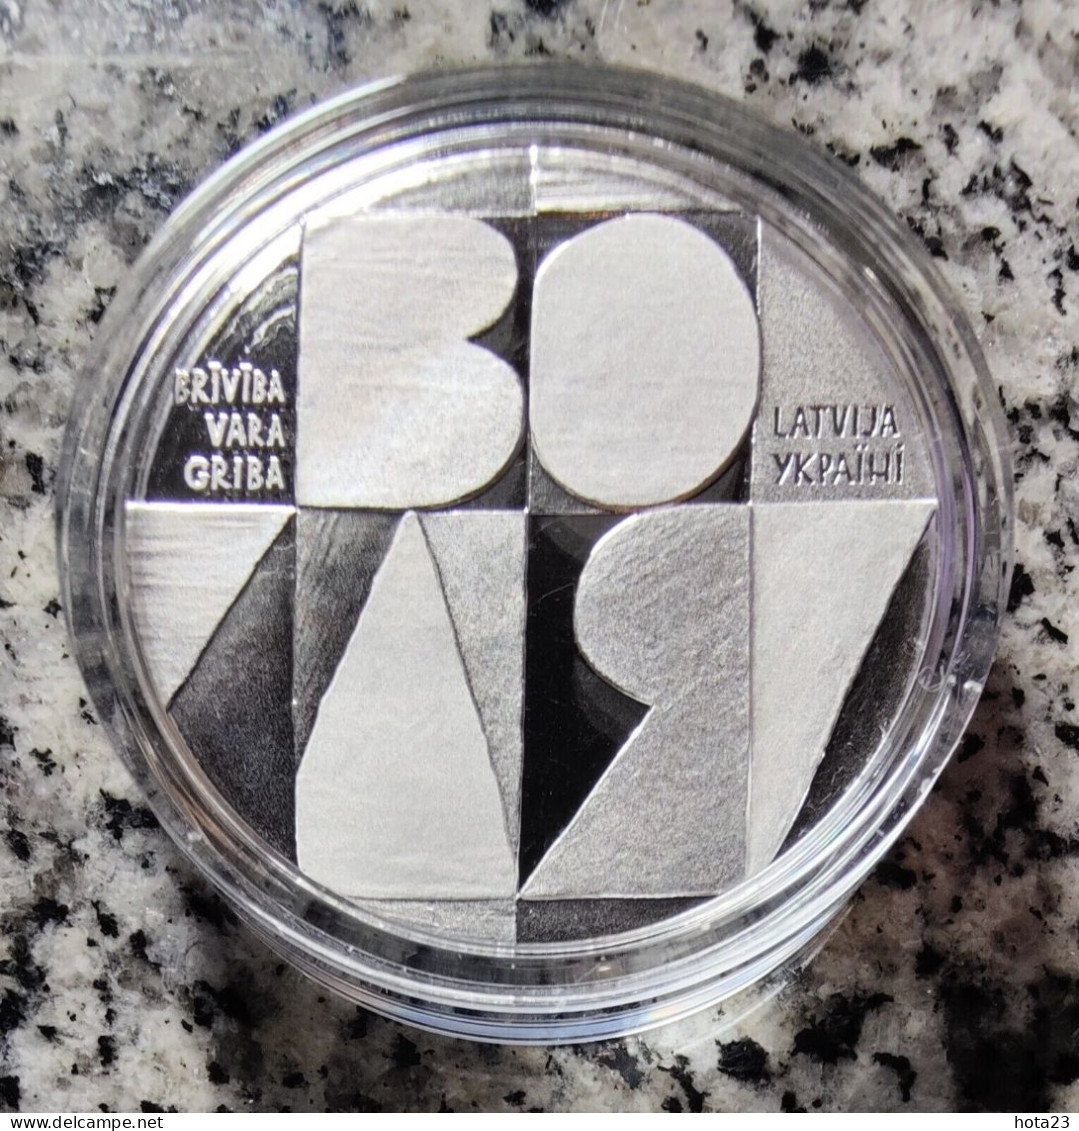 Latvia, Ukraine 5 Euro 2022 Silver Coin Fight For FREEDOM; WILL; POWER PROOF - Letland